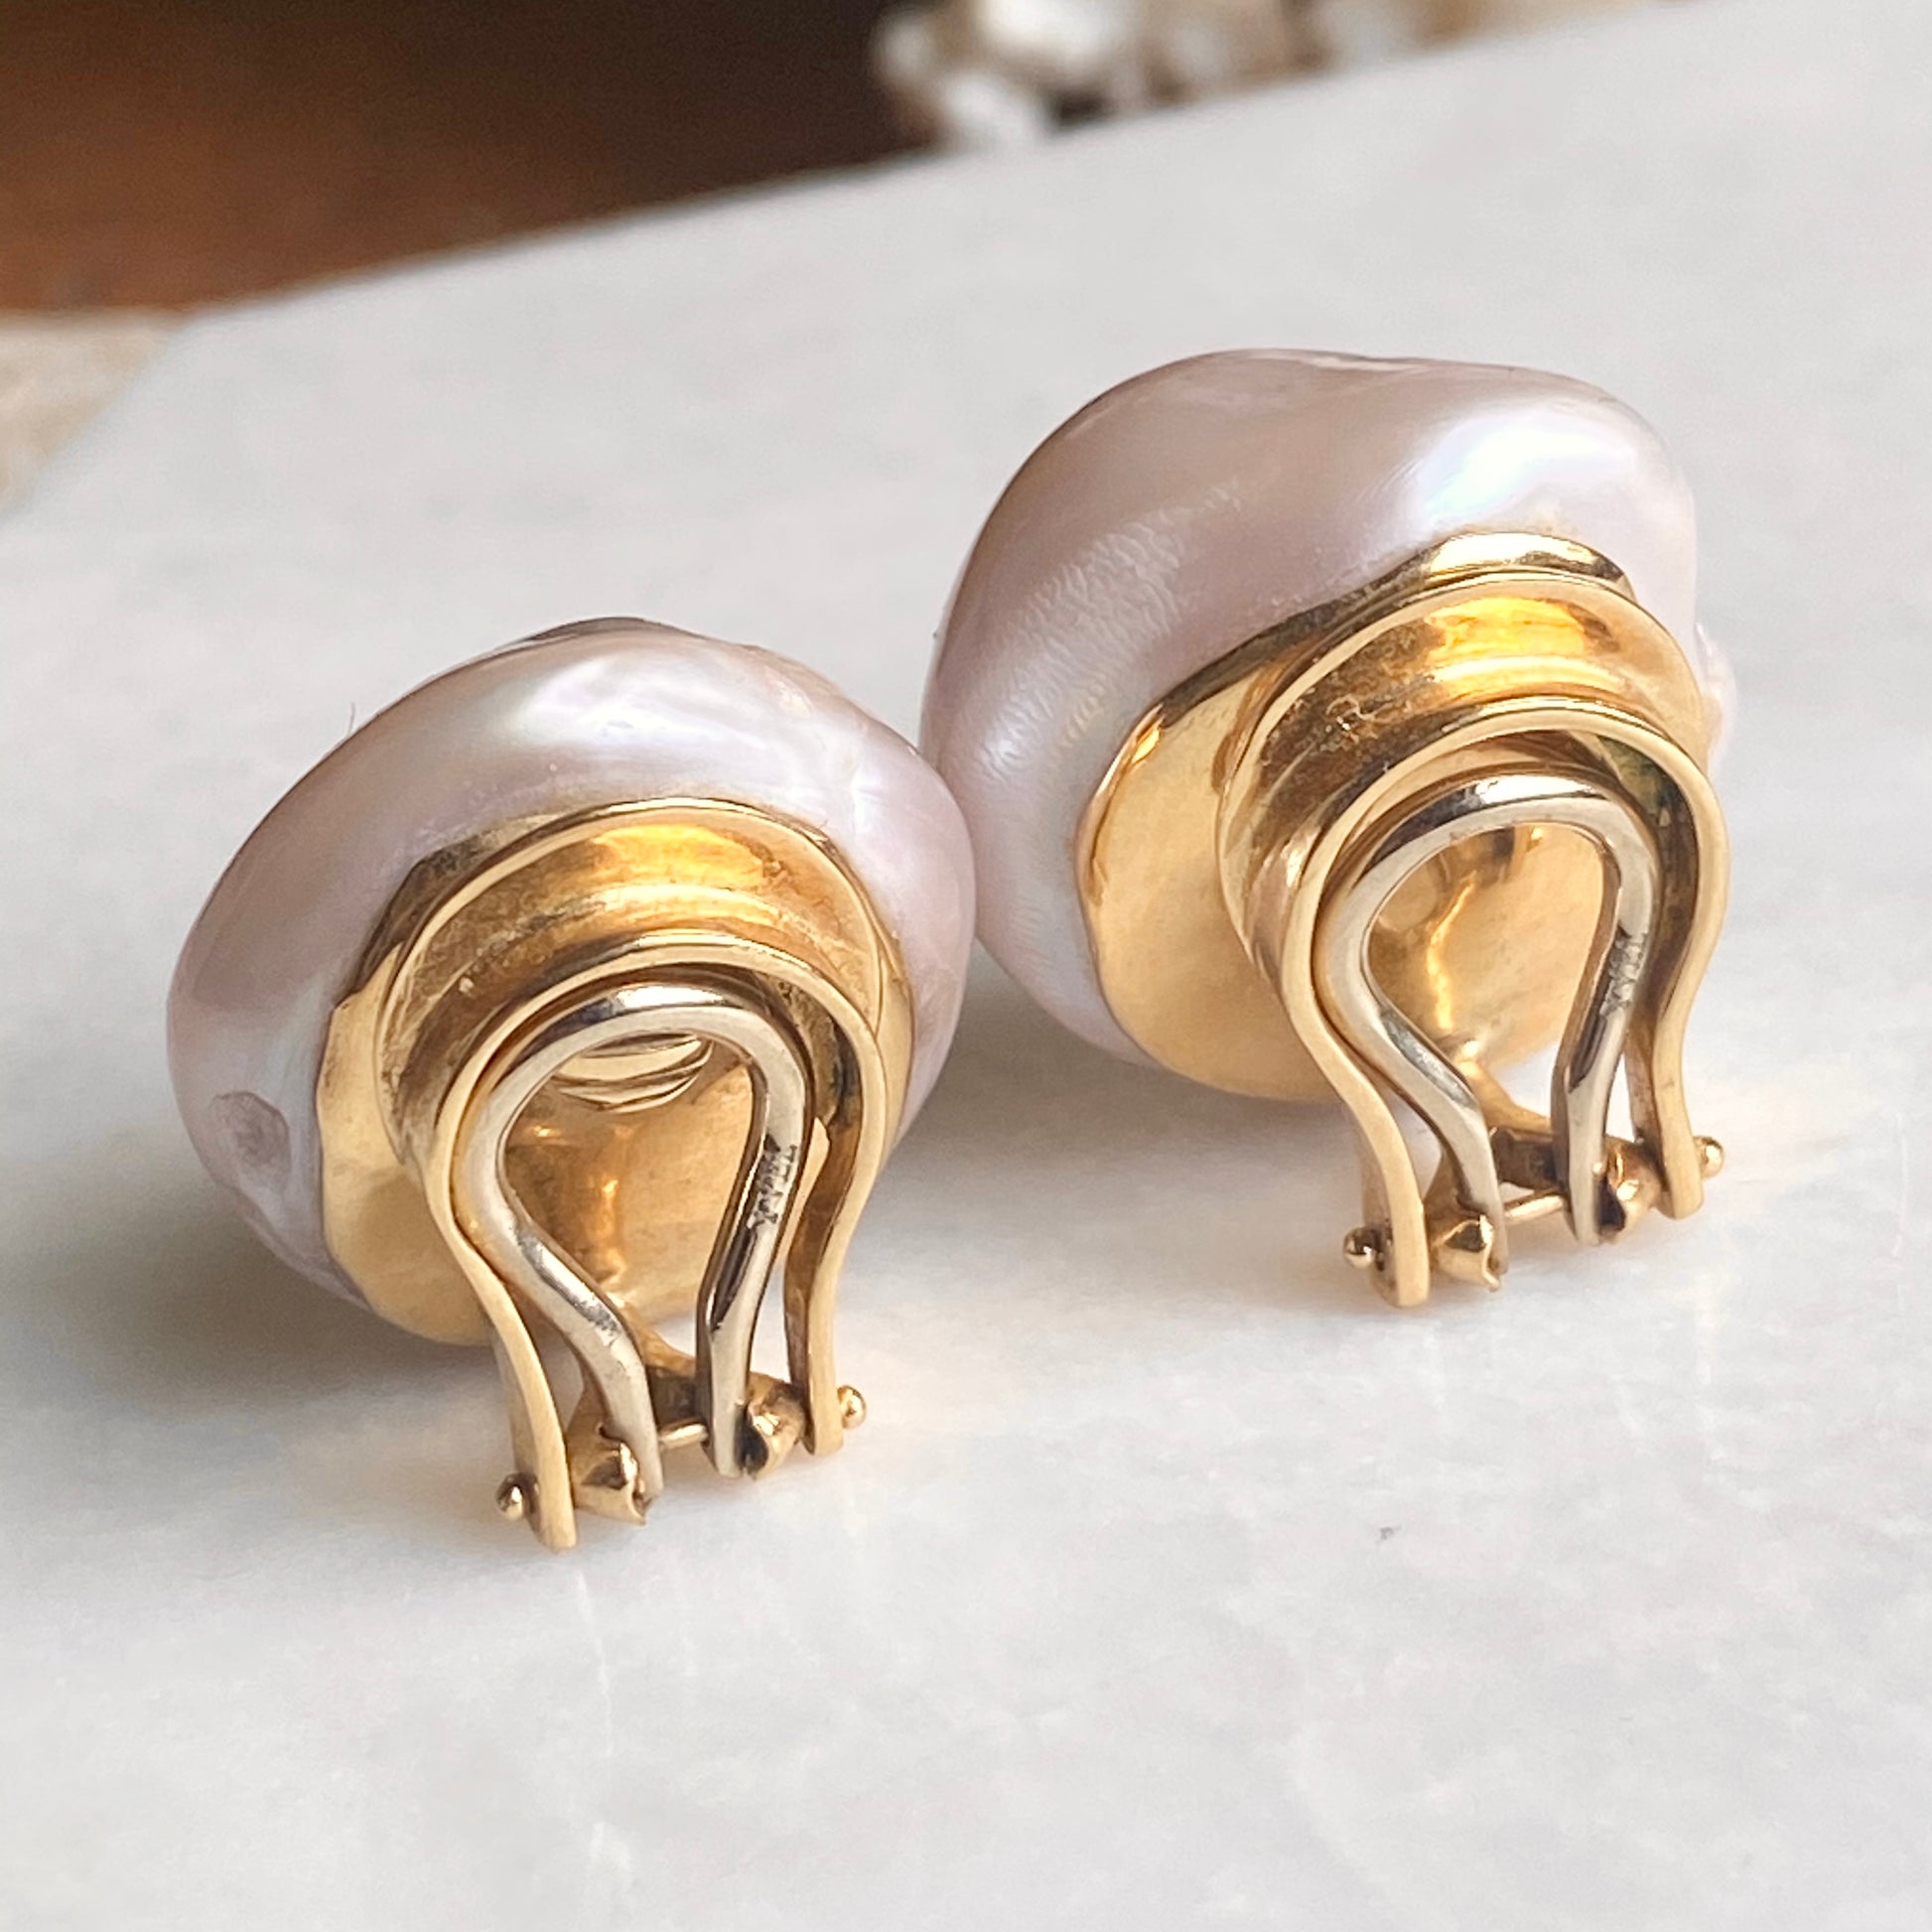 14K Yellow Gold and Pearl Screw Back Earrings | Jewelry | Old Silver and Gold